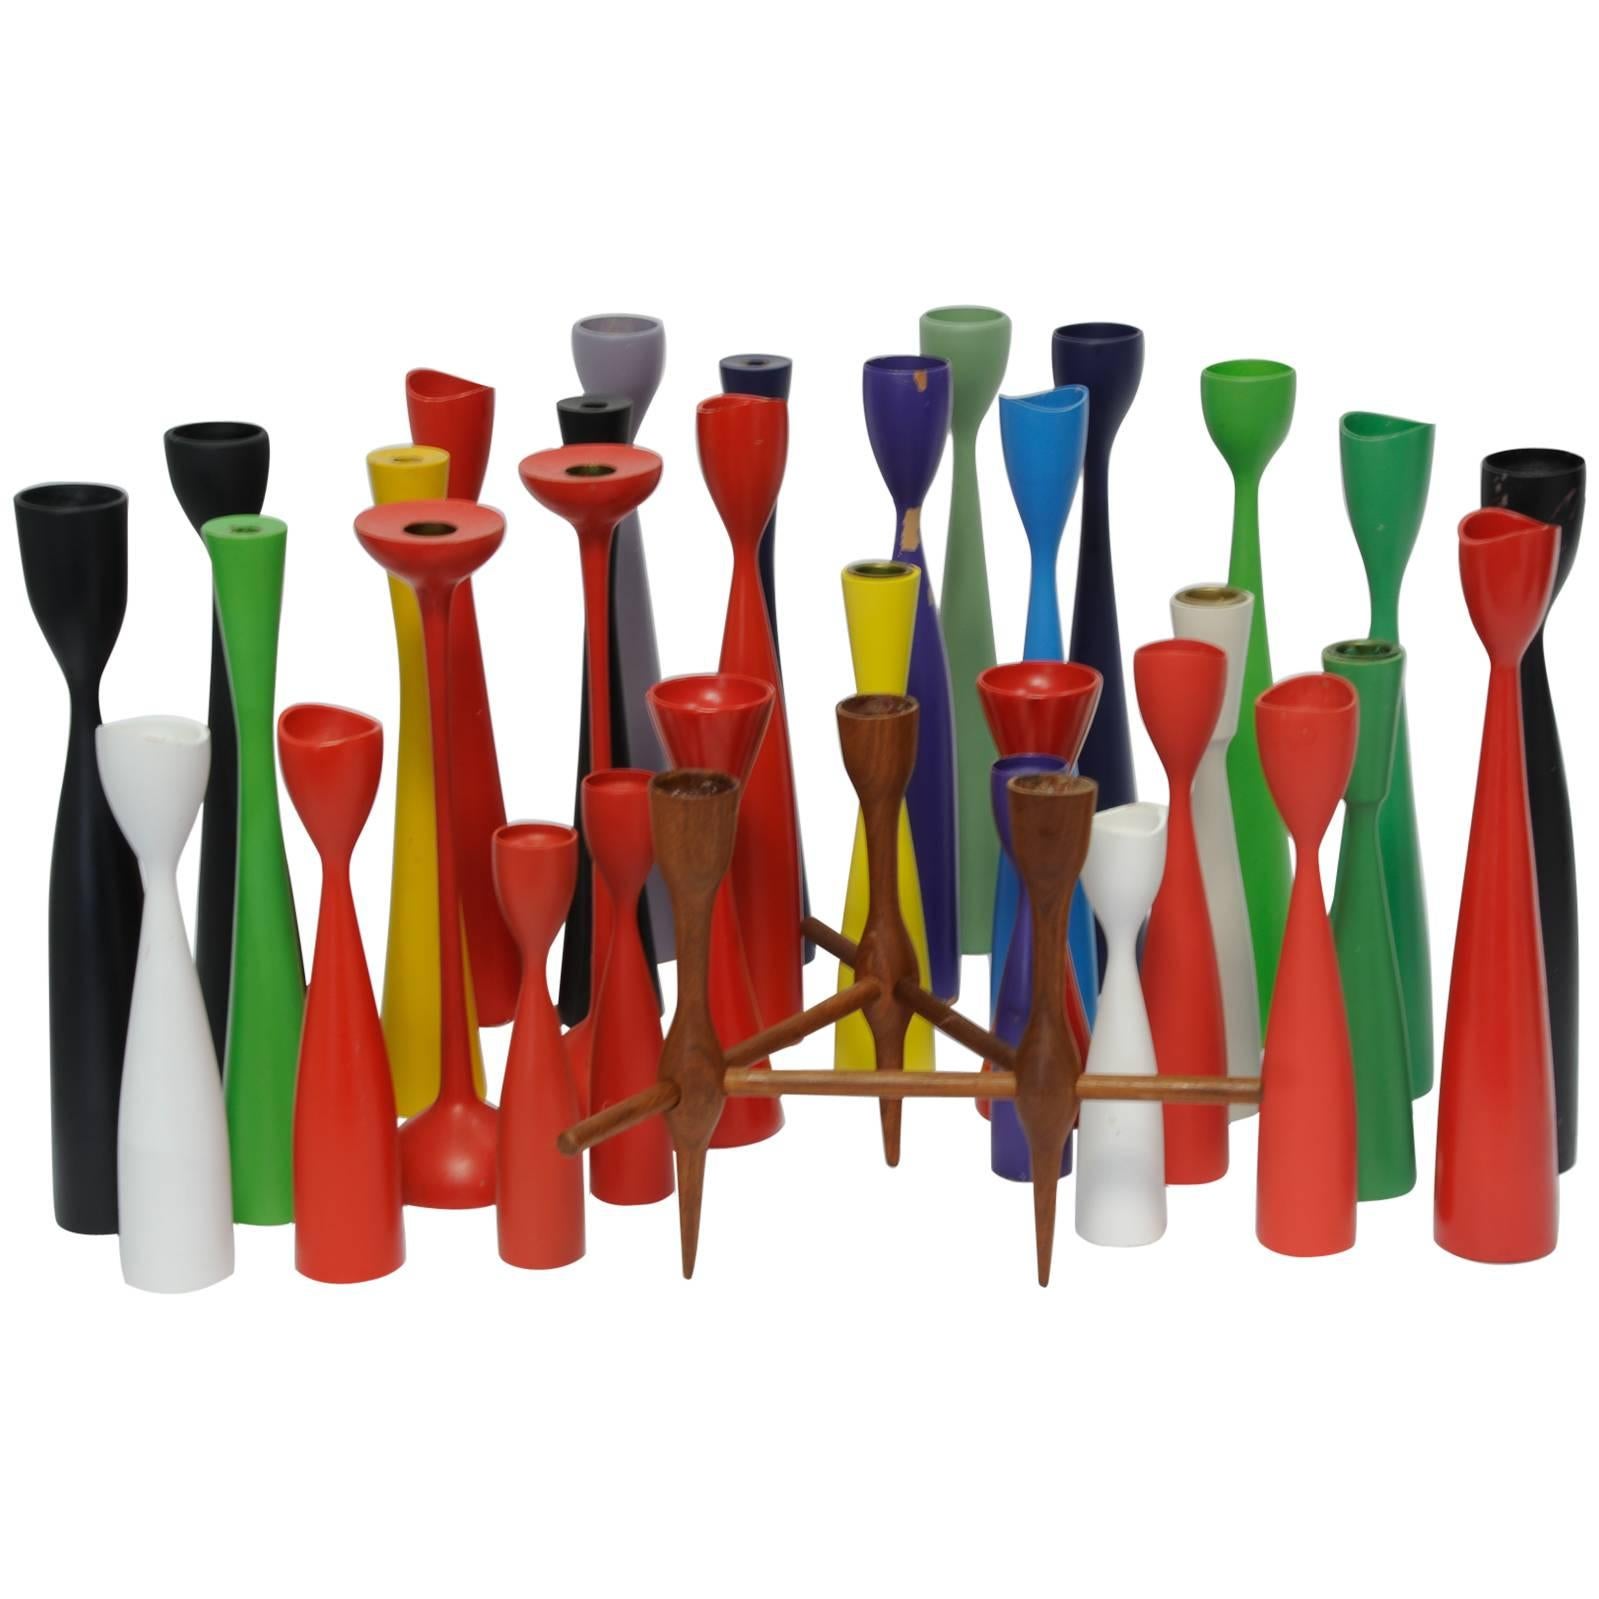 33 Danish Candle Stick Collection in a Rainbow of Shapes and Colors